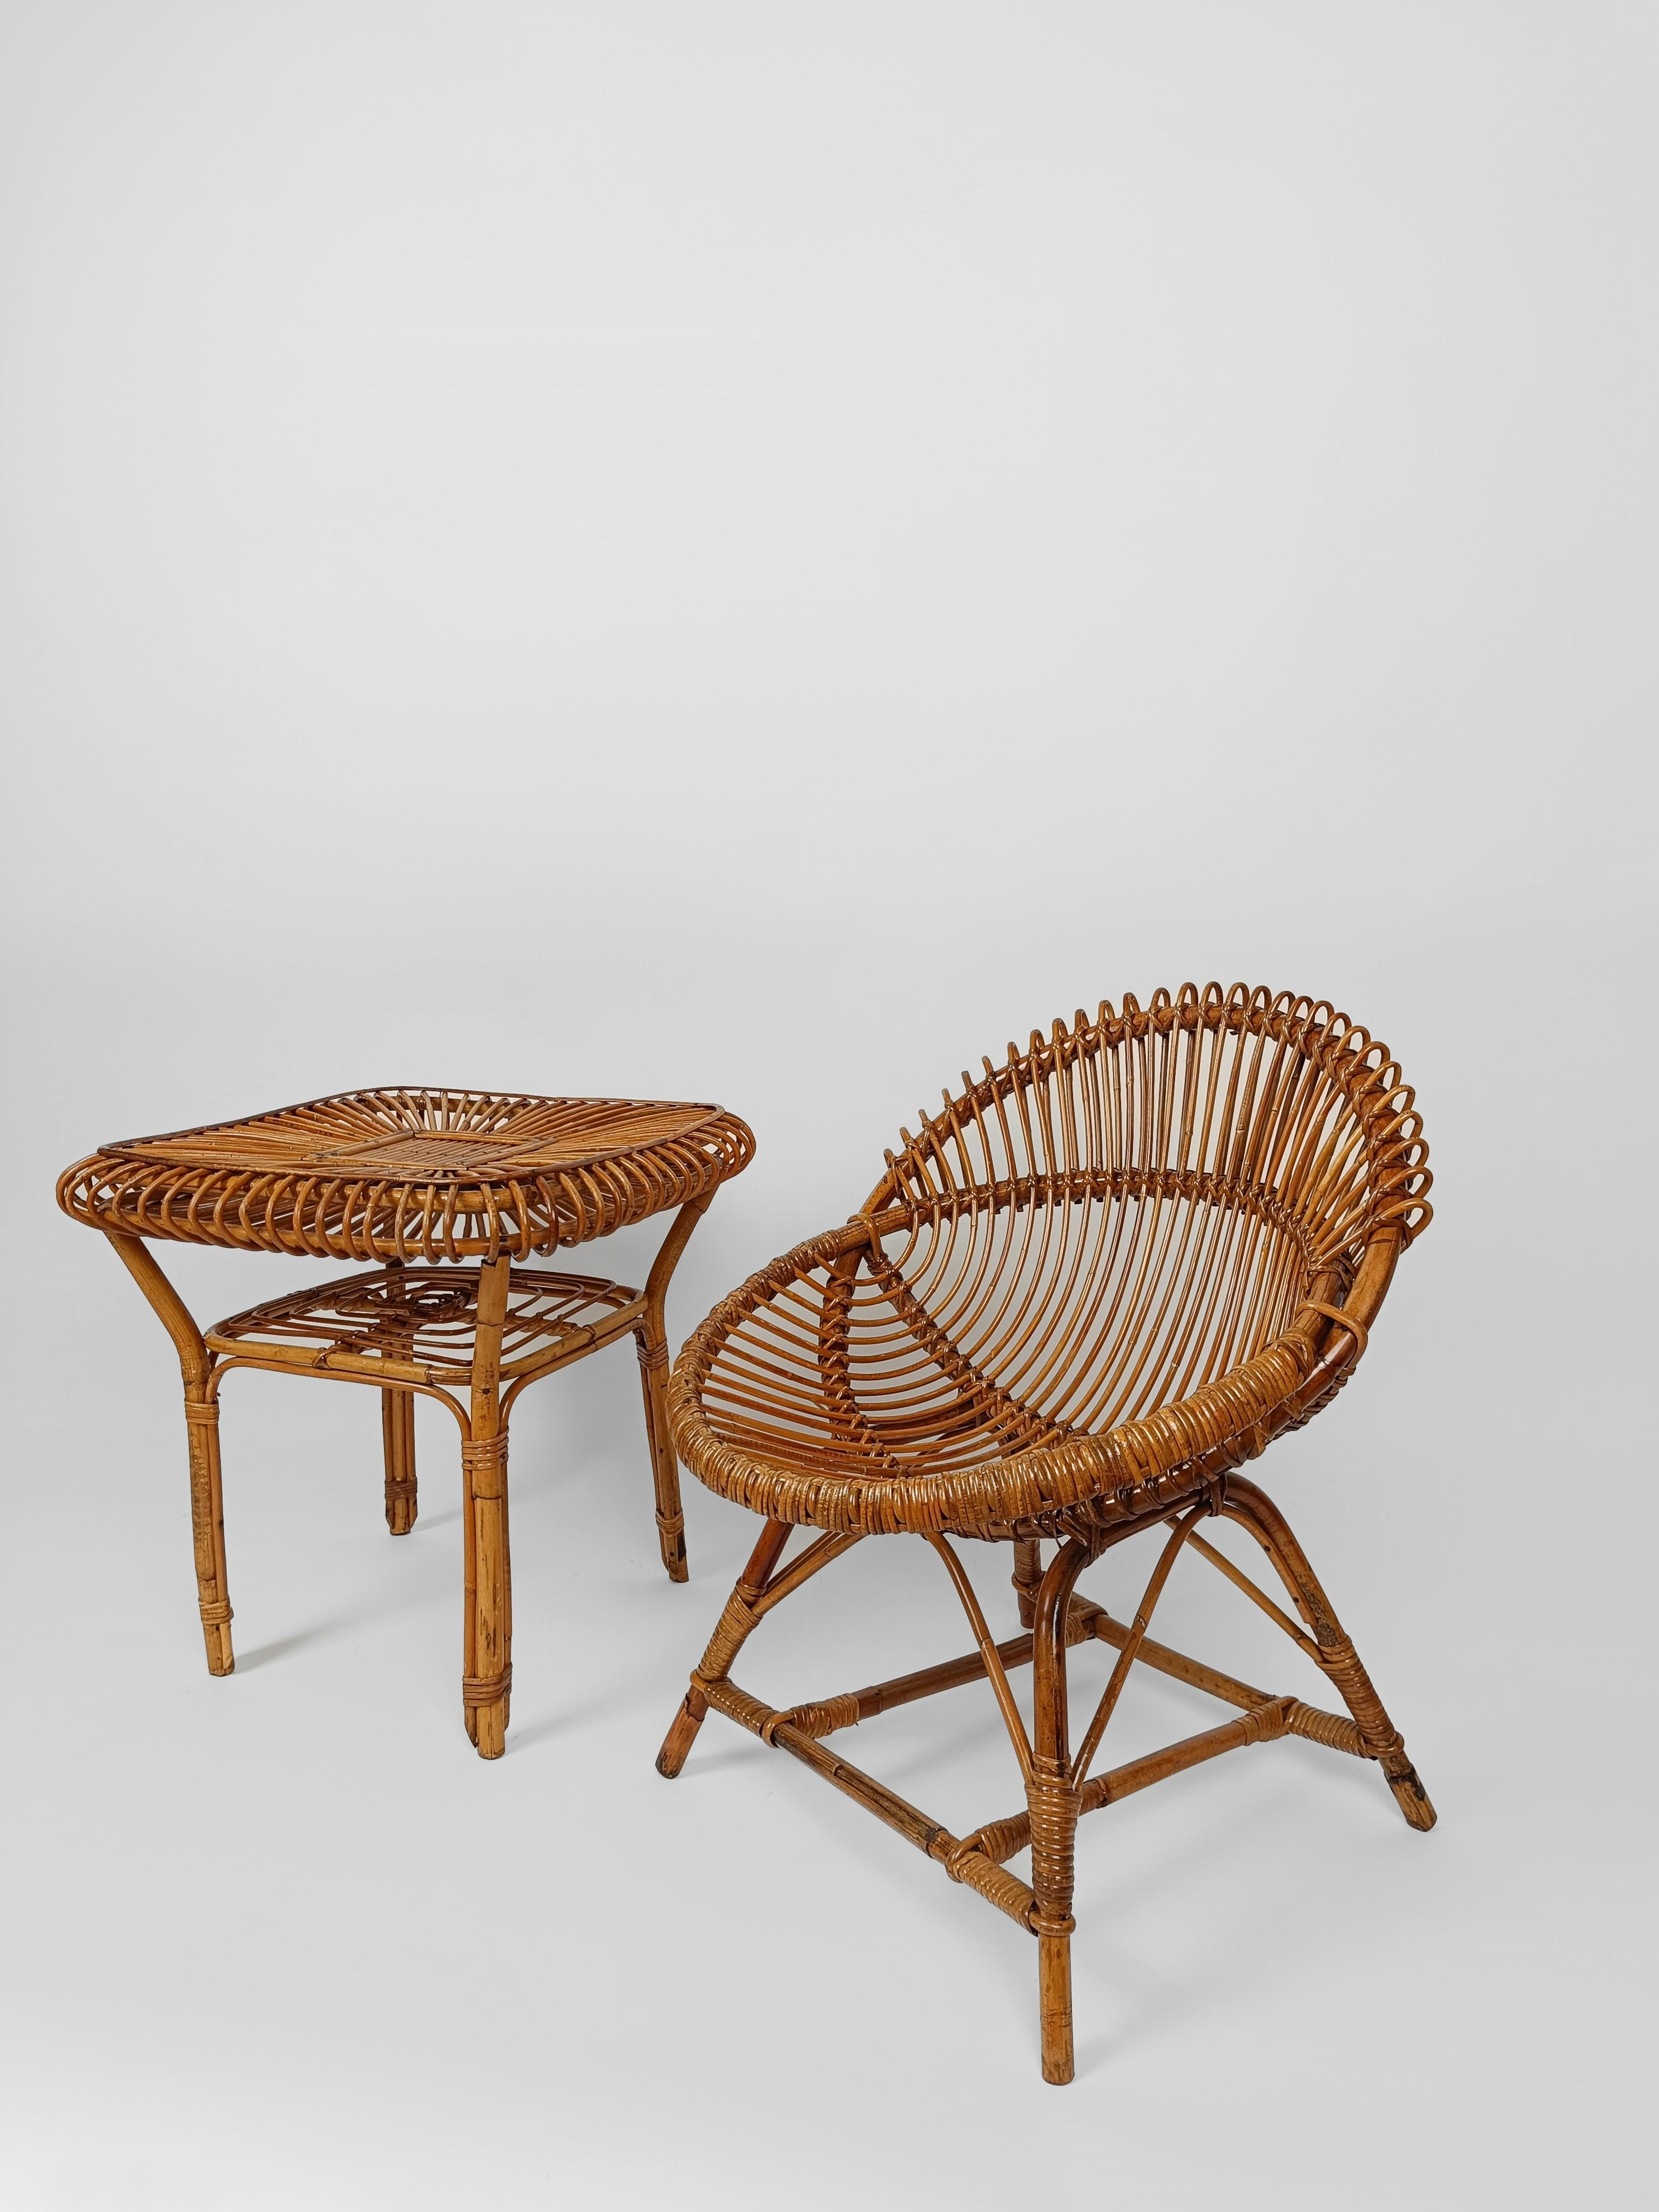 Vintage Cane and Rattan Set of 2 shell-shaped Armchairs with Coffe Table, 1960s For Sale 7